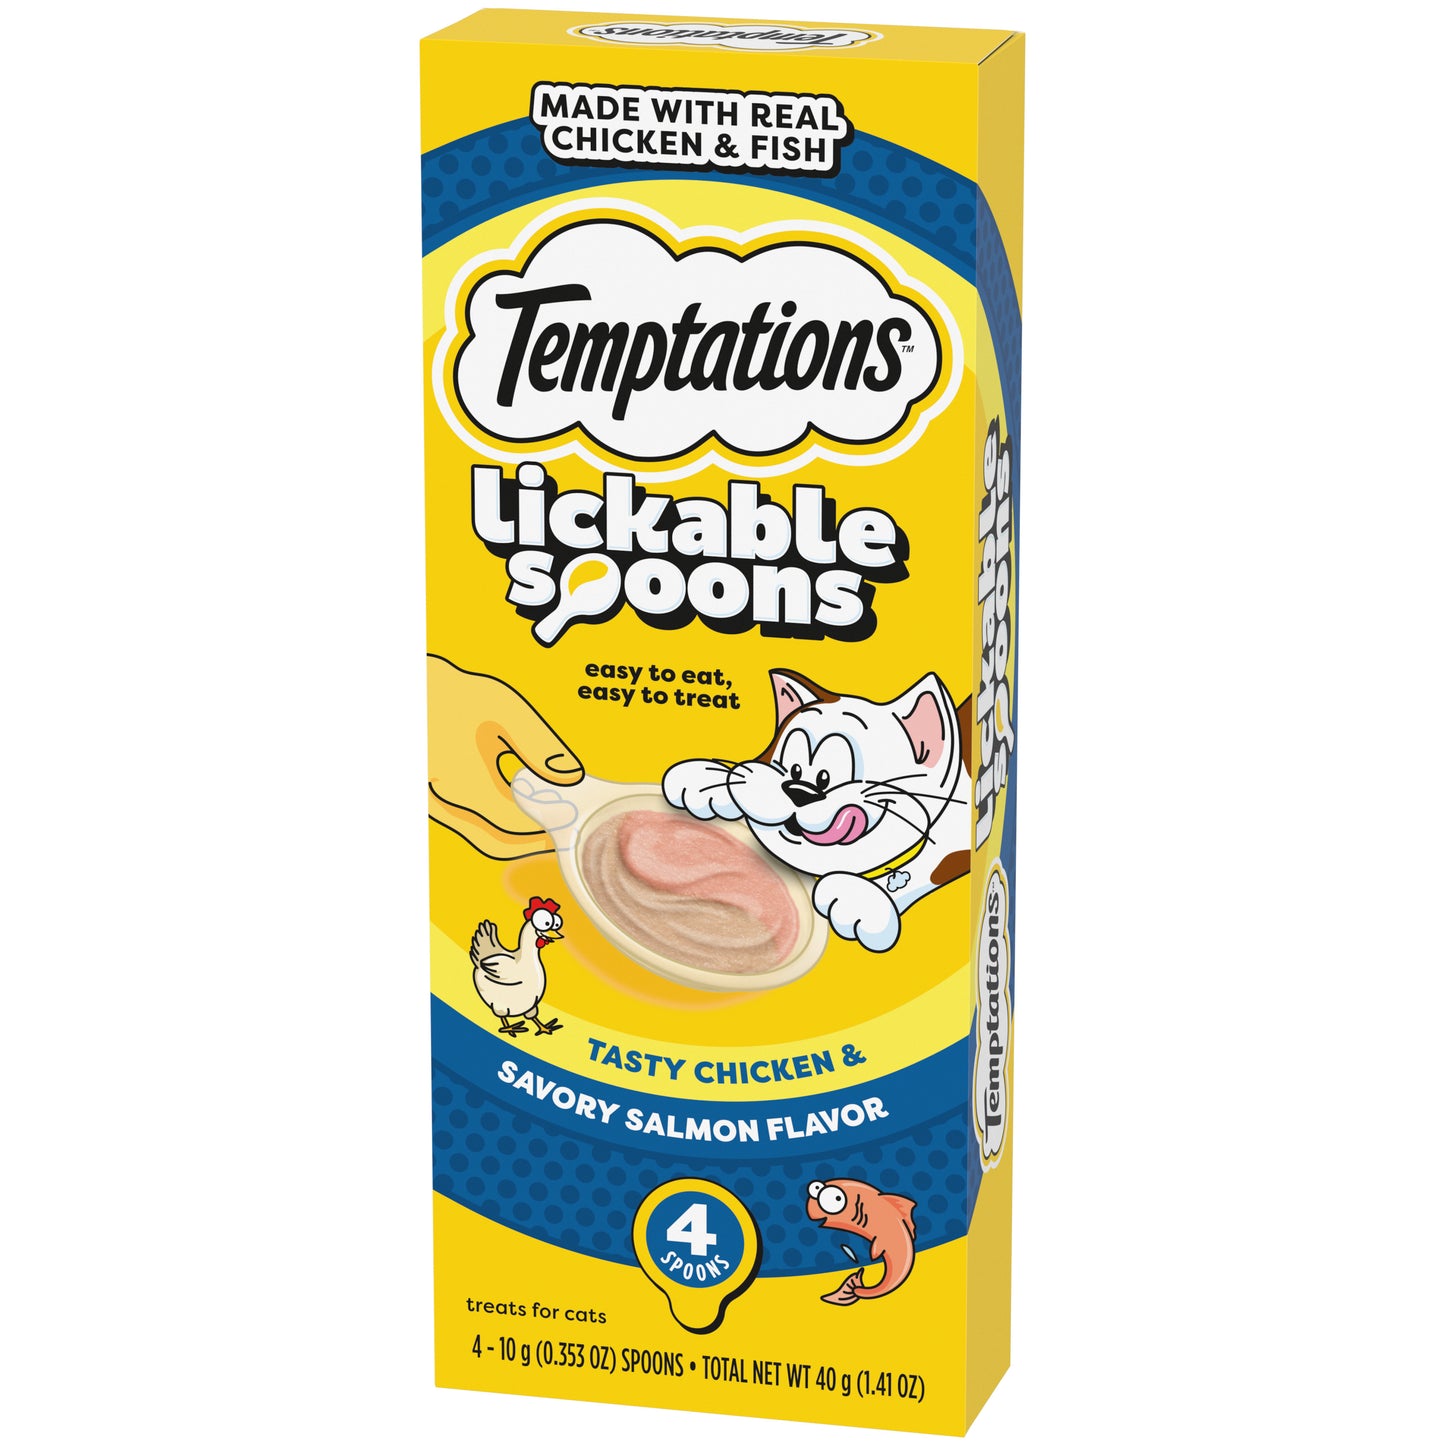 [Temptations][Temptations Lickable Spoons, Tasty Chicken and Savory Salmon, Pack of 4][Image Center Right (3/4 Angle)]